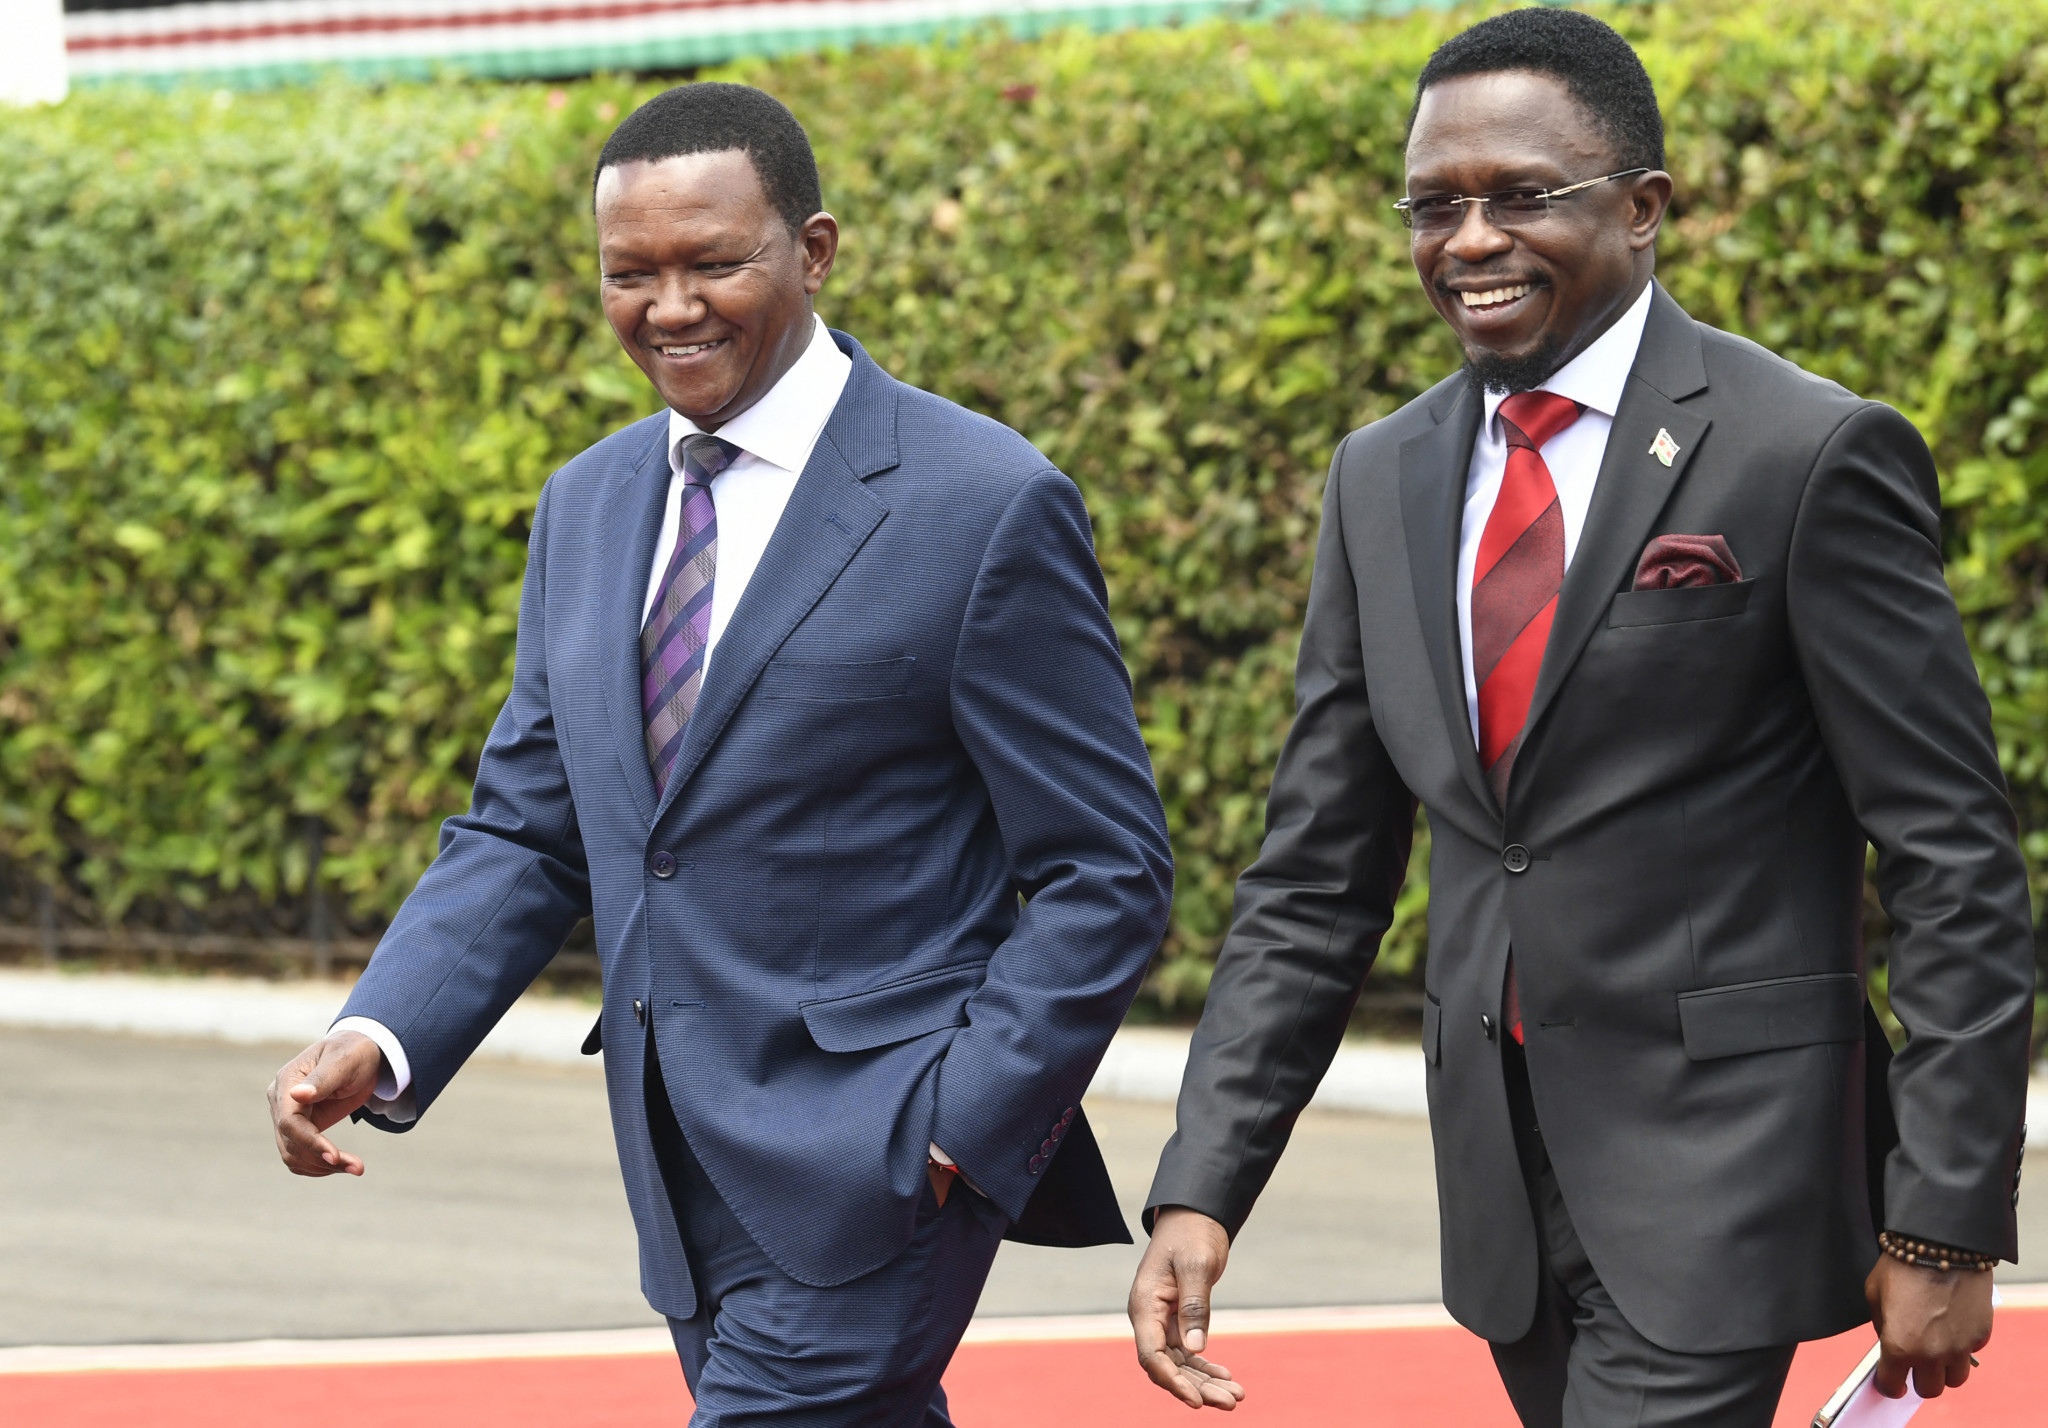 Kenyan Sports Minister Ababu Namwamba, right, wants to "criminalise doping" in athletics in the country ©Getty Images